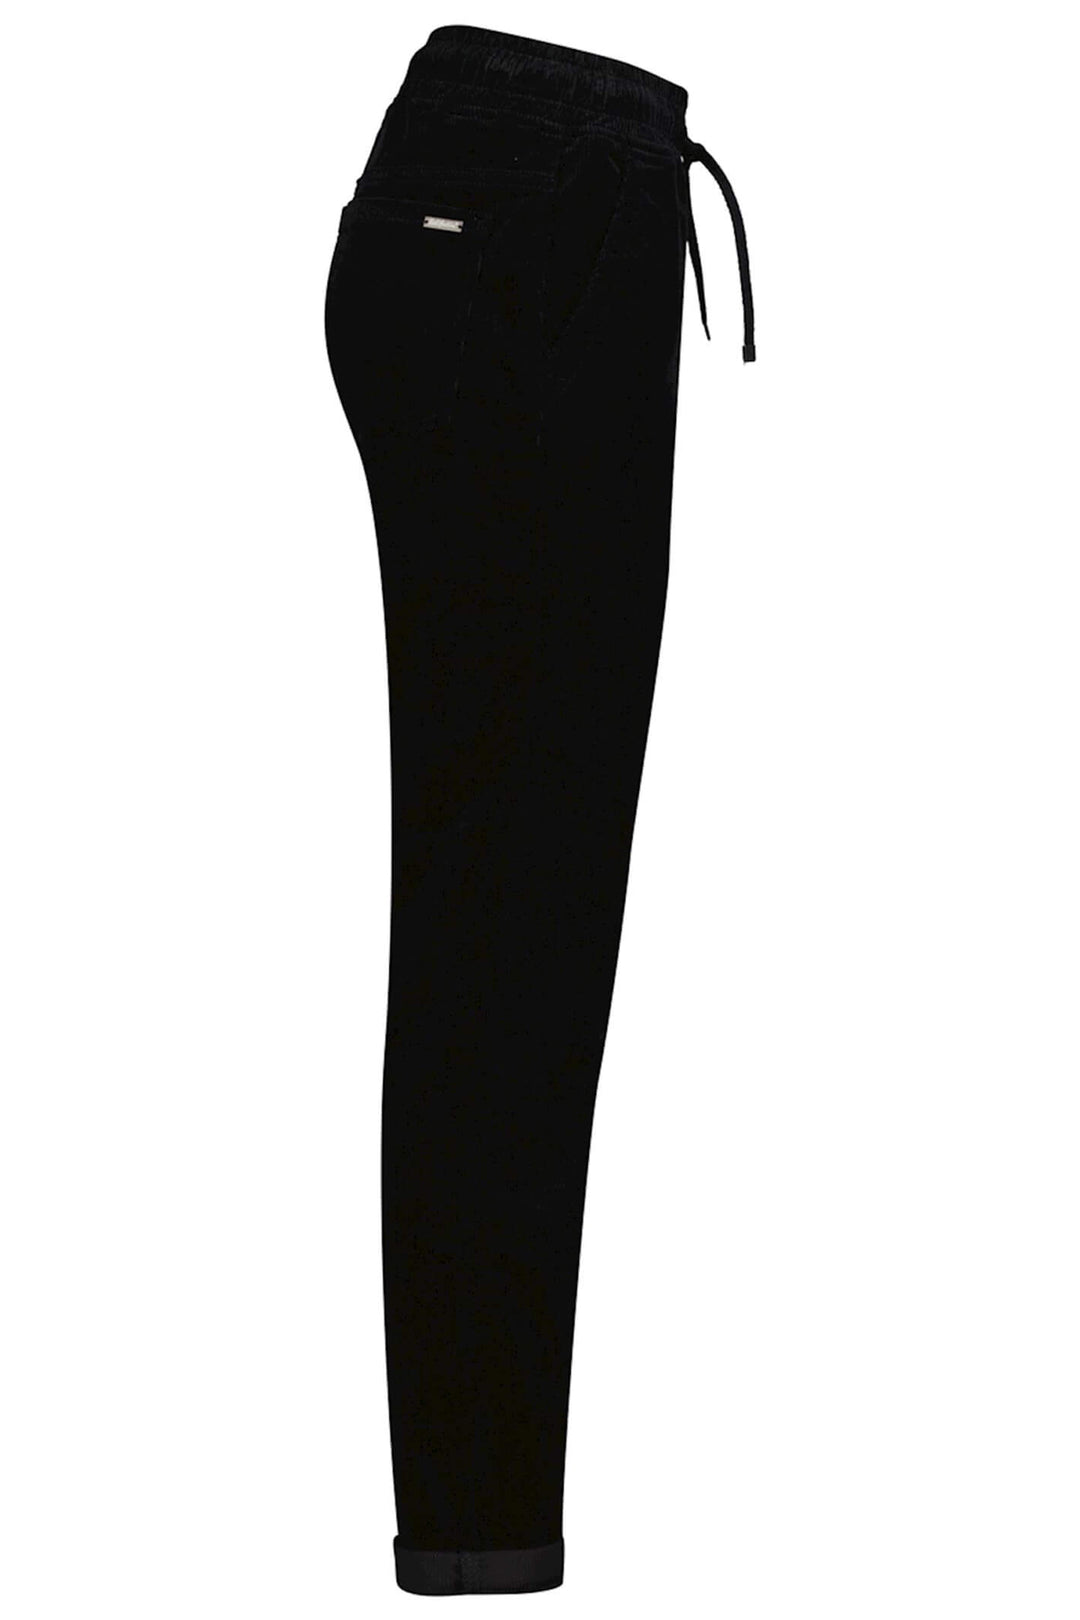 Red Button SRB4142 Tessy Black Corduroy Pull-On Trousers - Olivia Grace Fashion